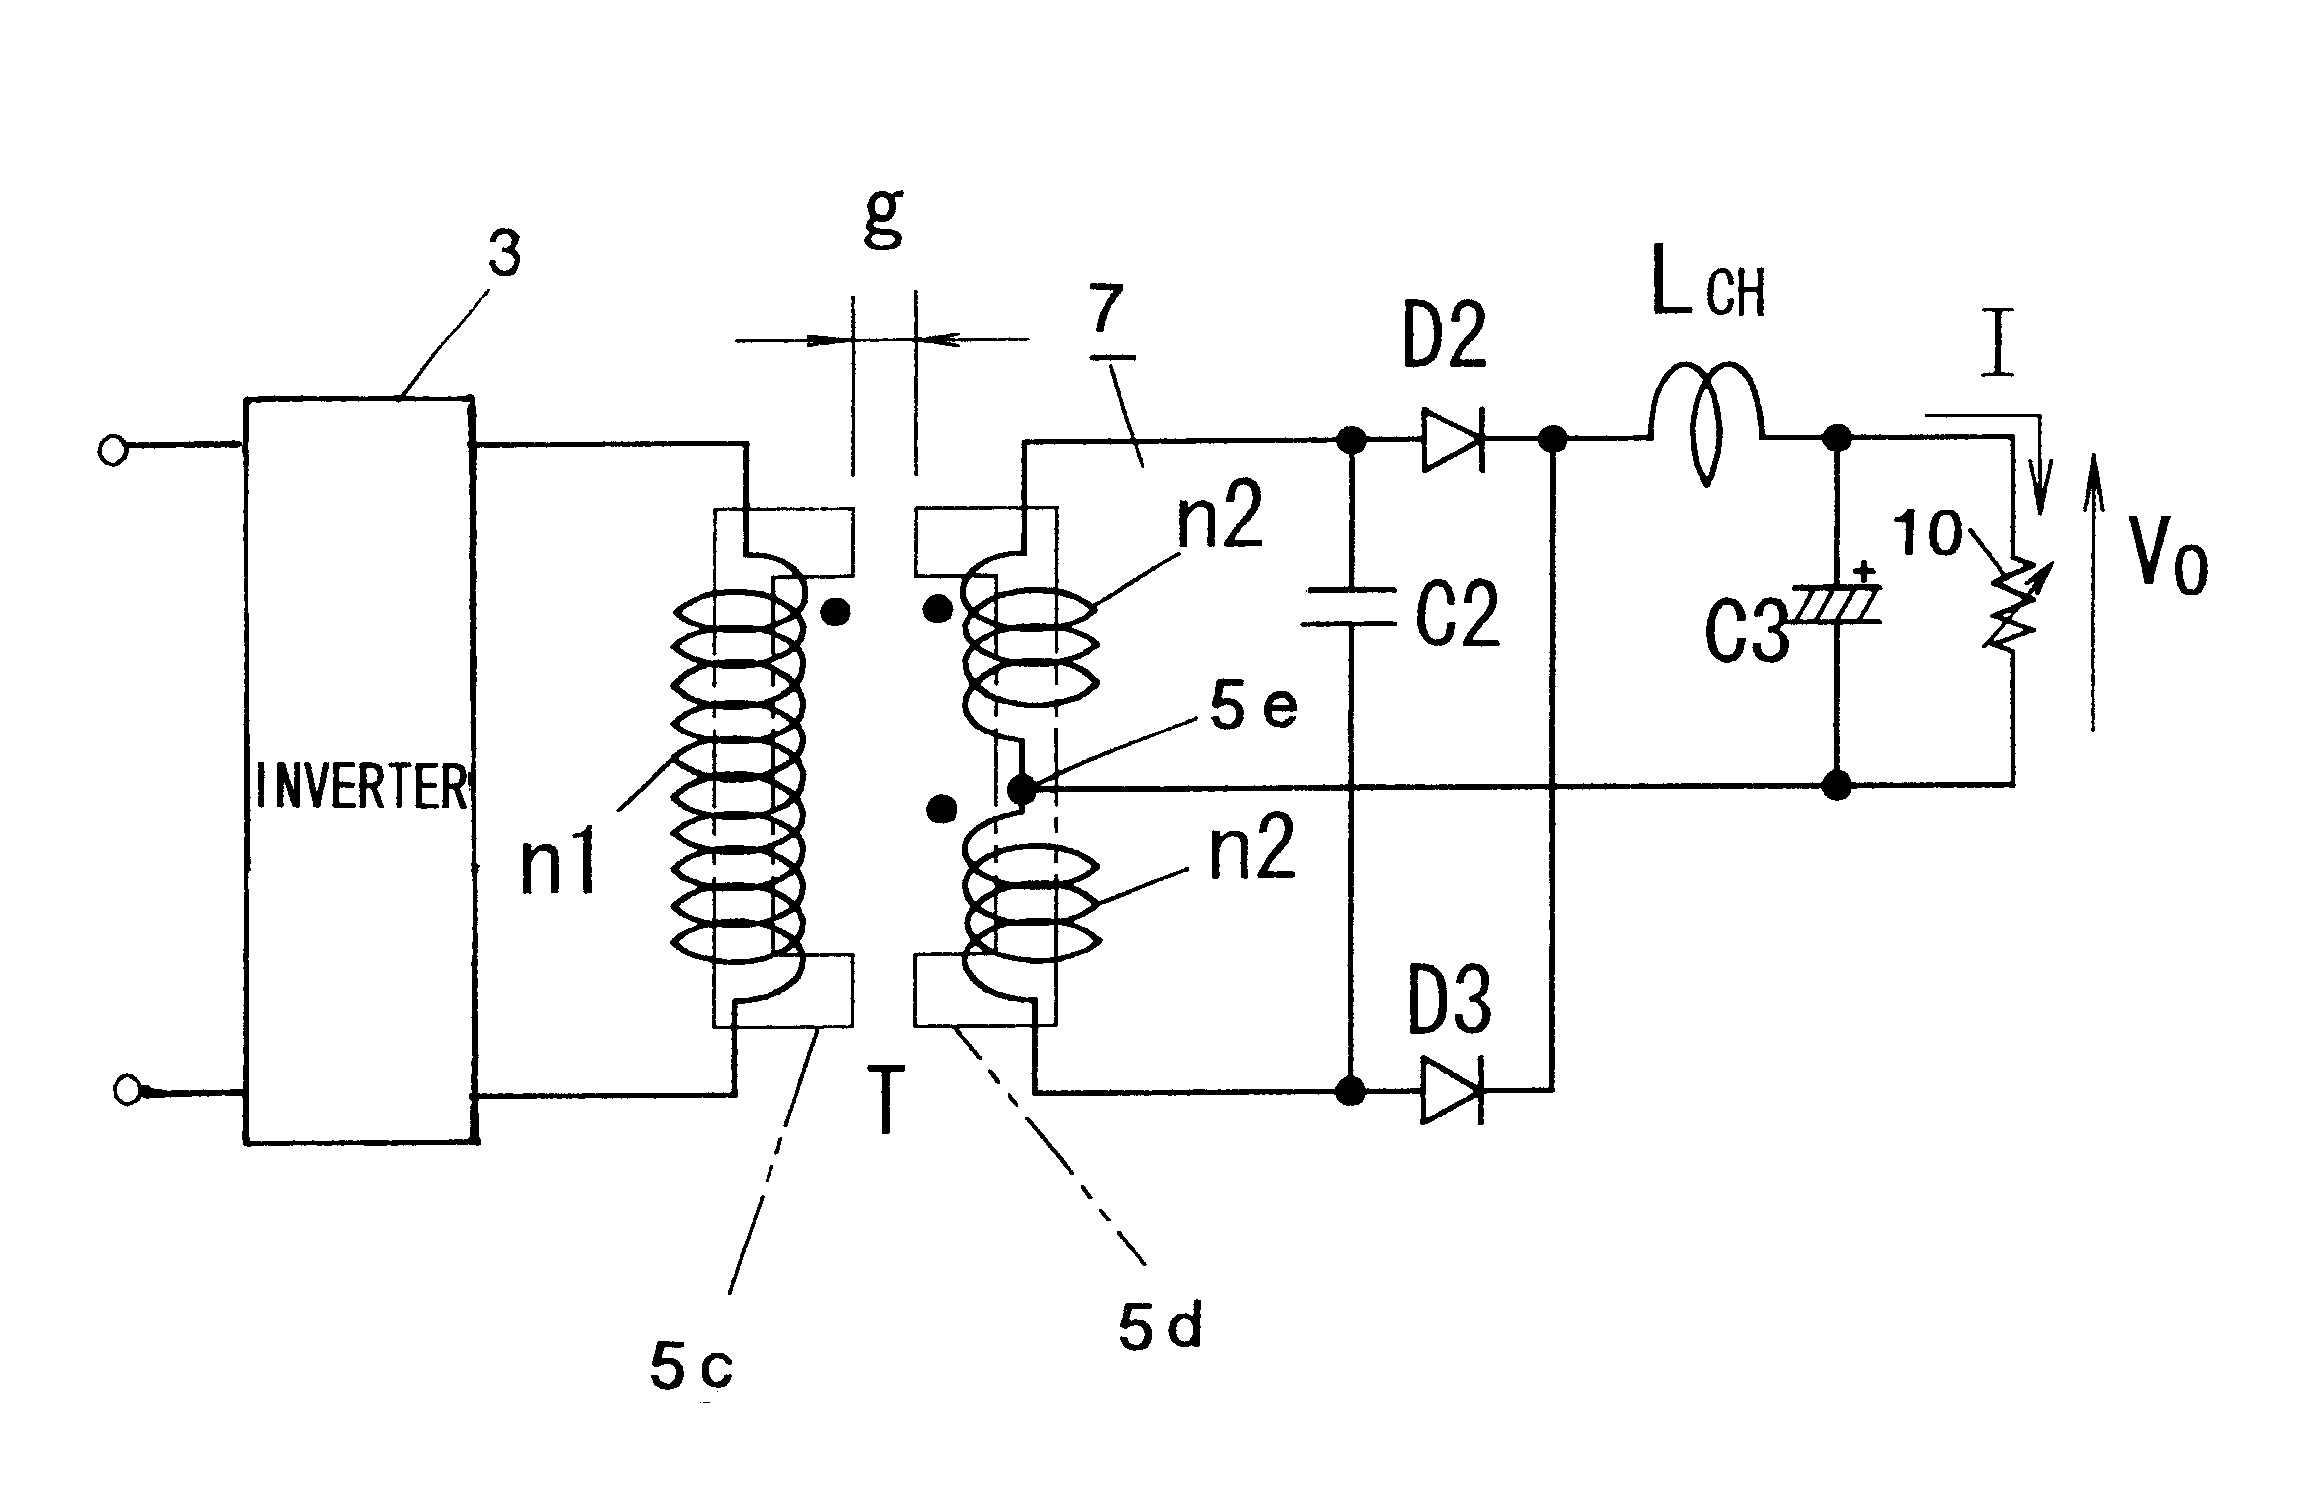 Non-contact electrical power transmission system having function of making load voltage constant